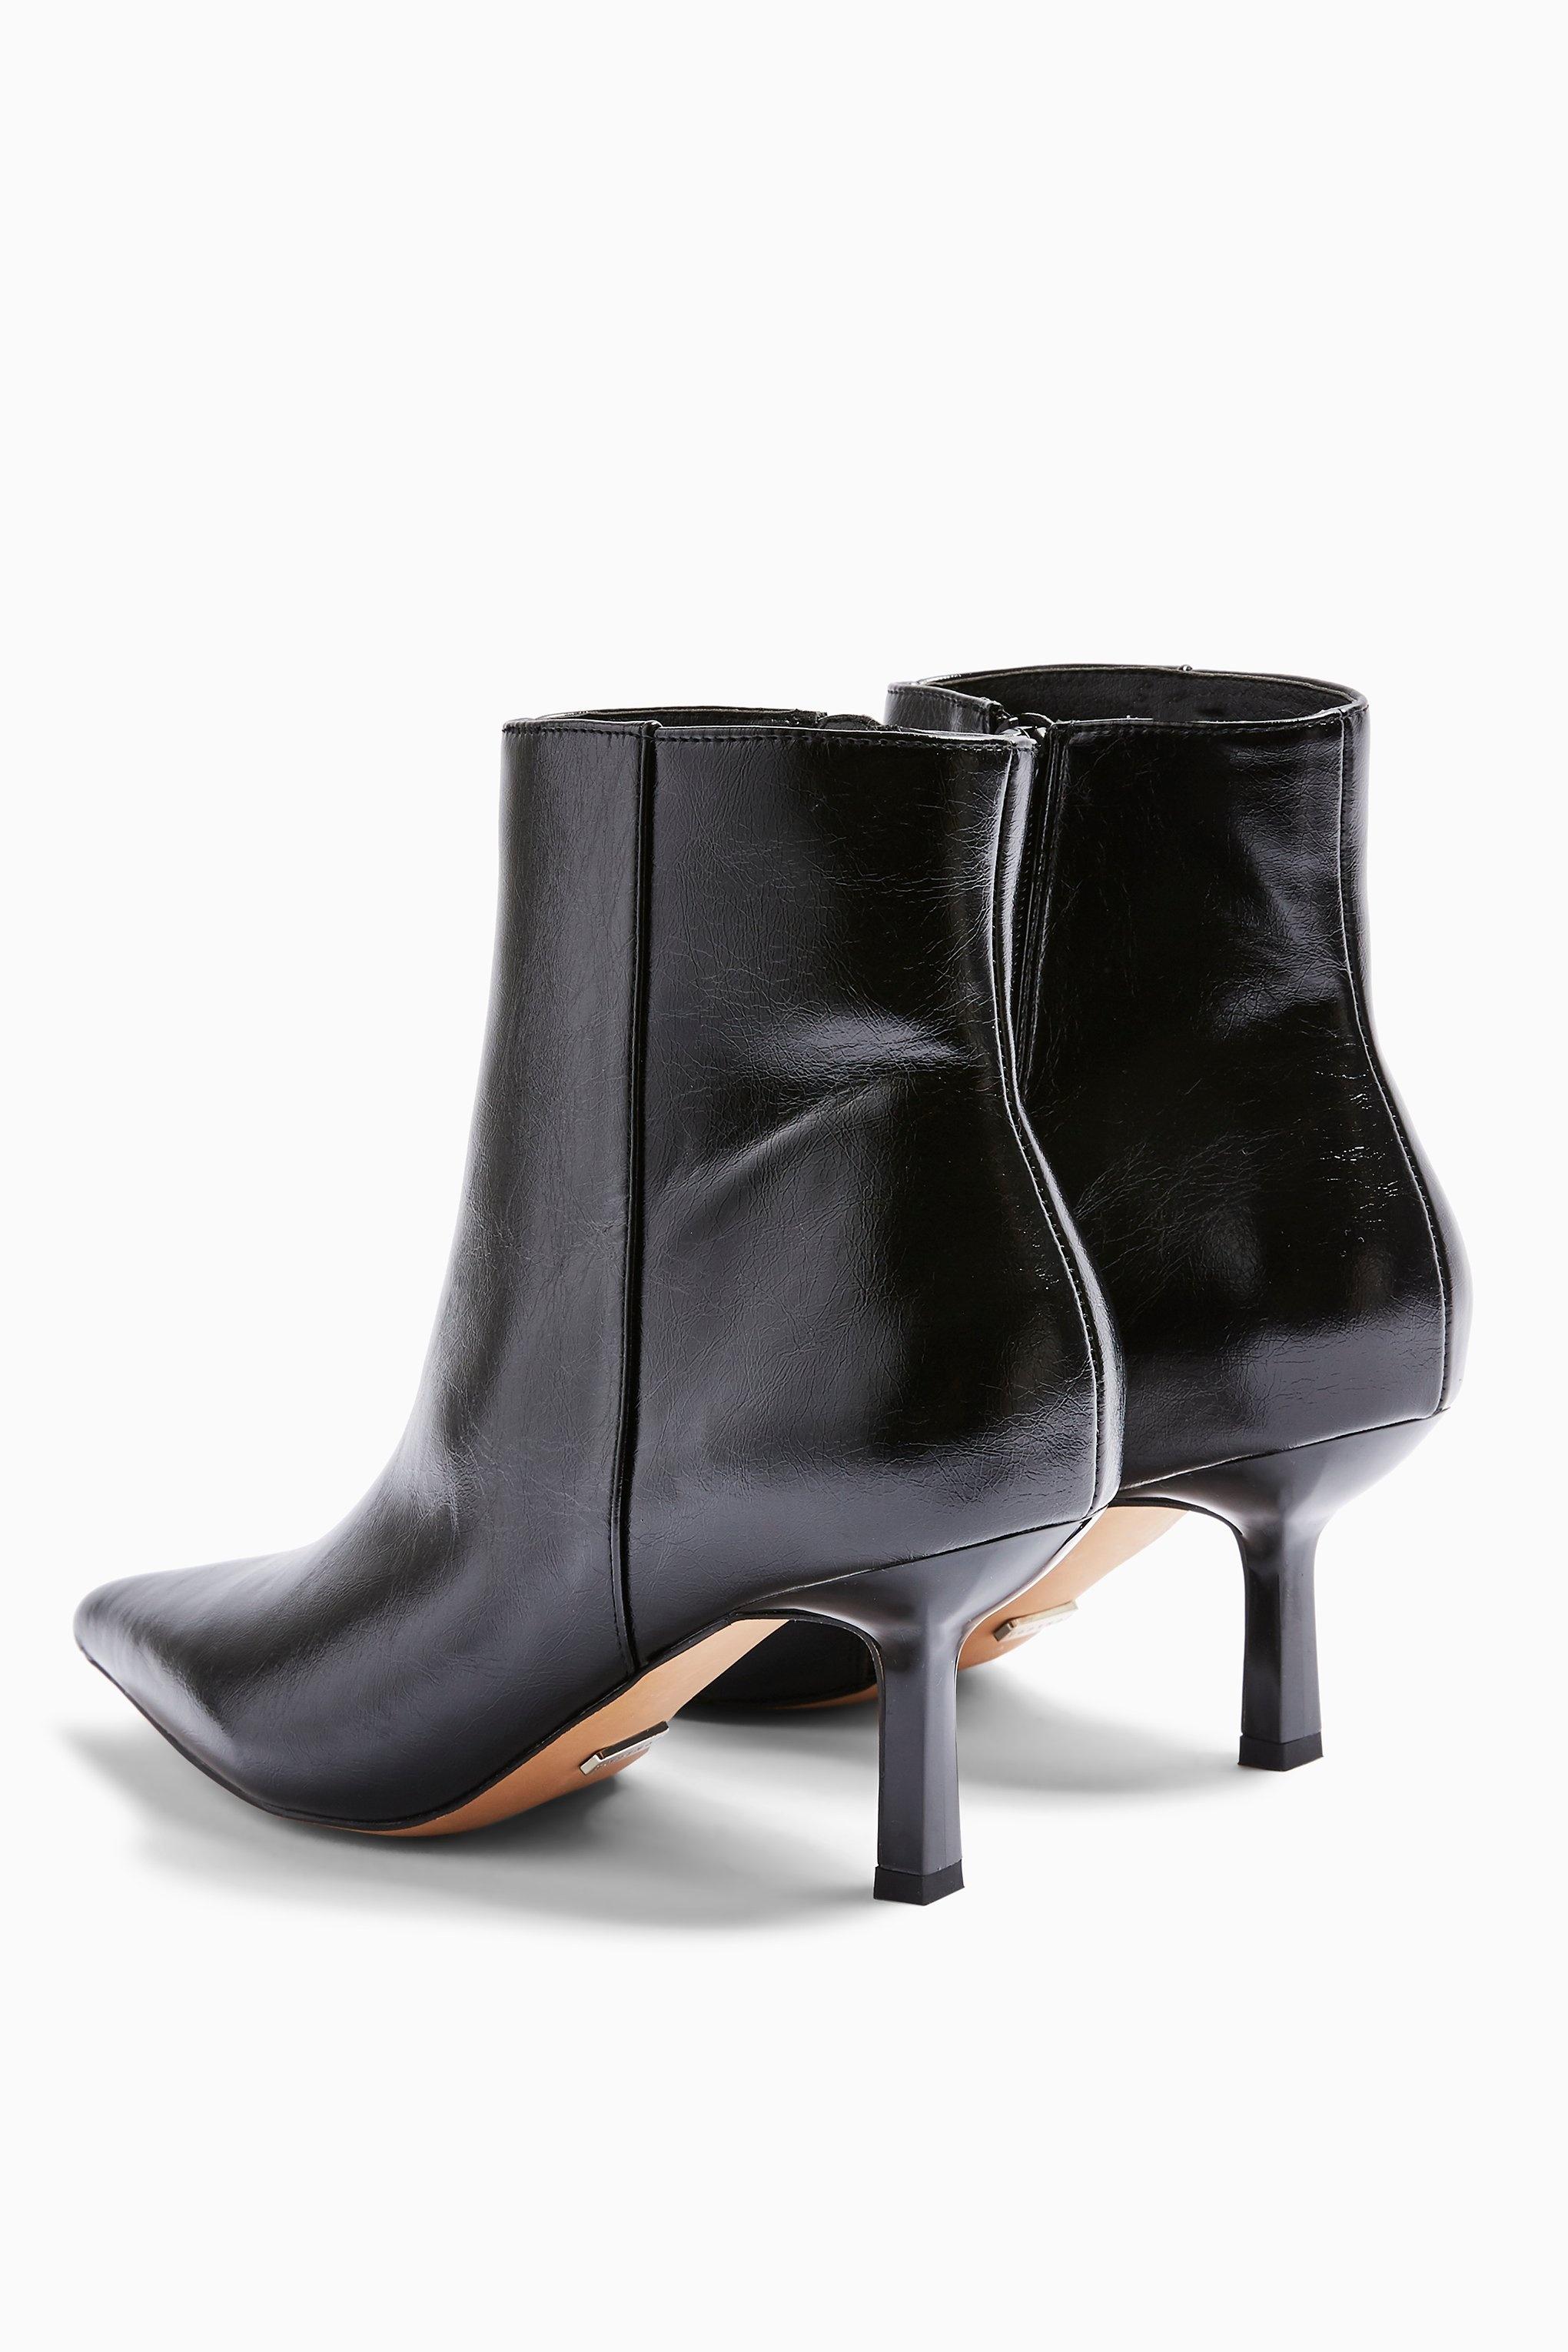 topshop pointed boots